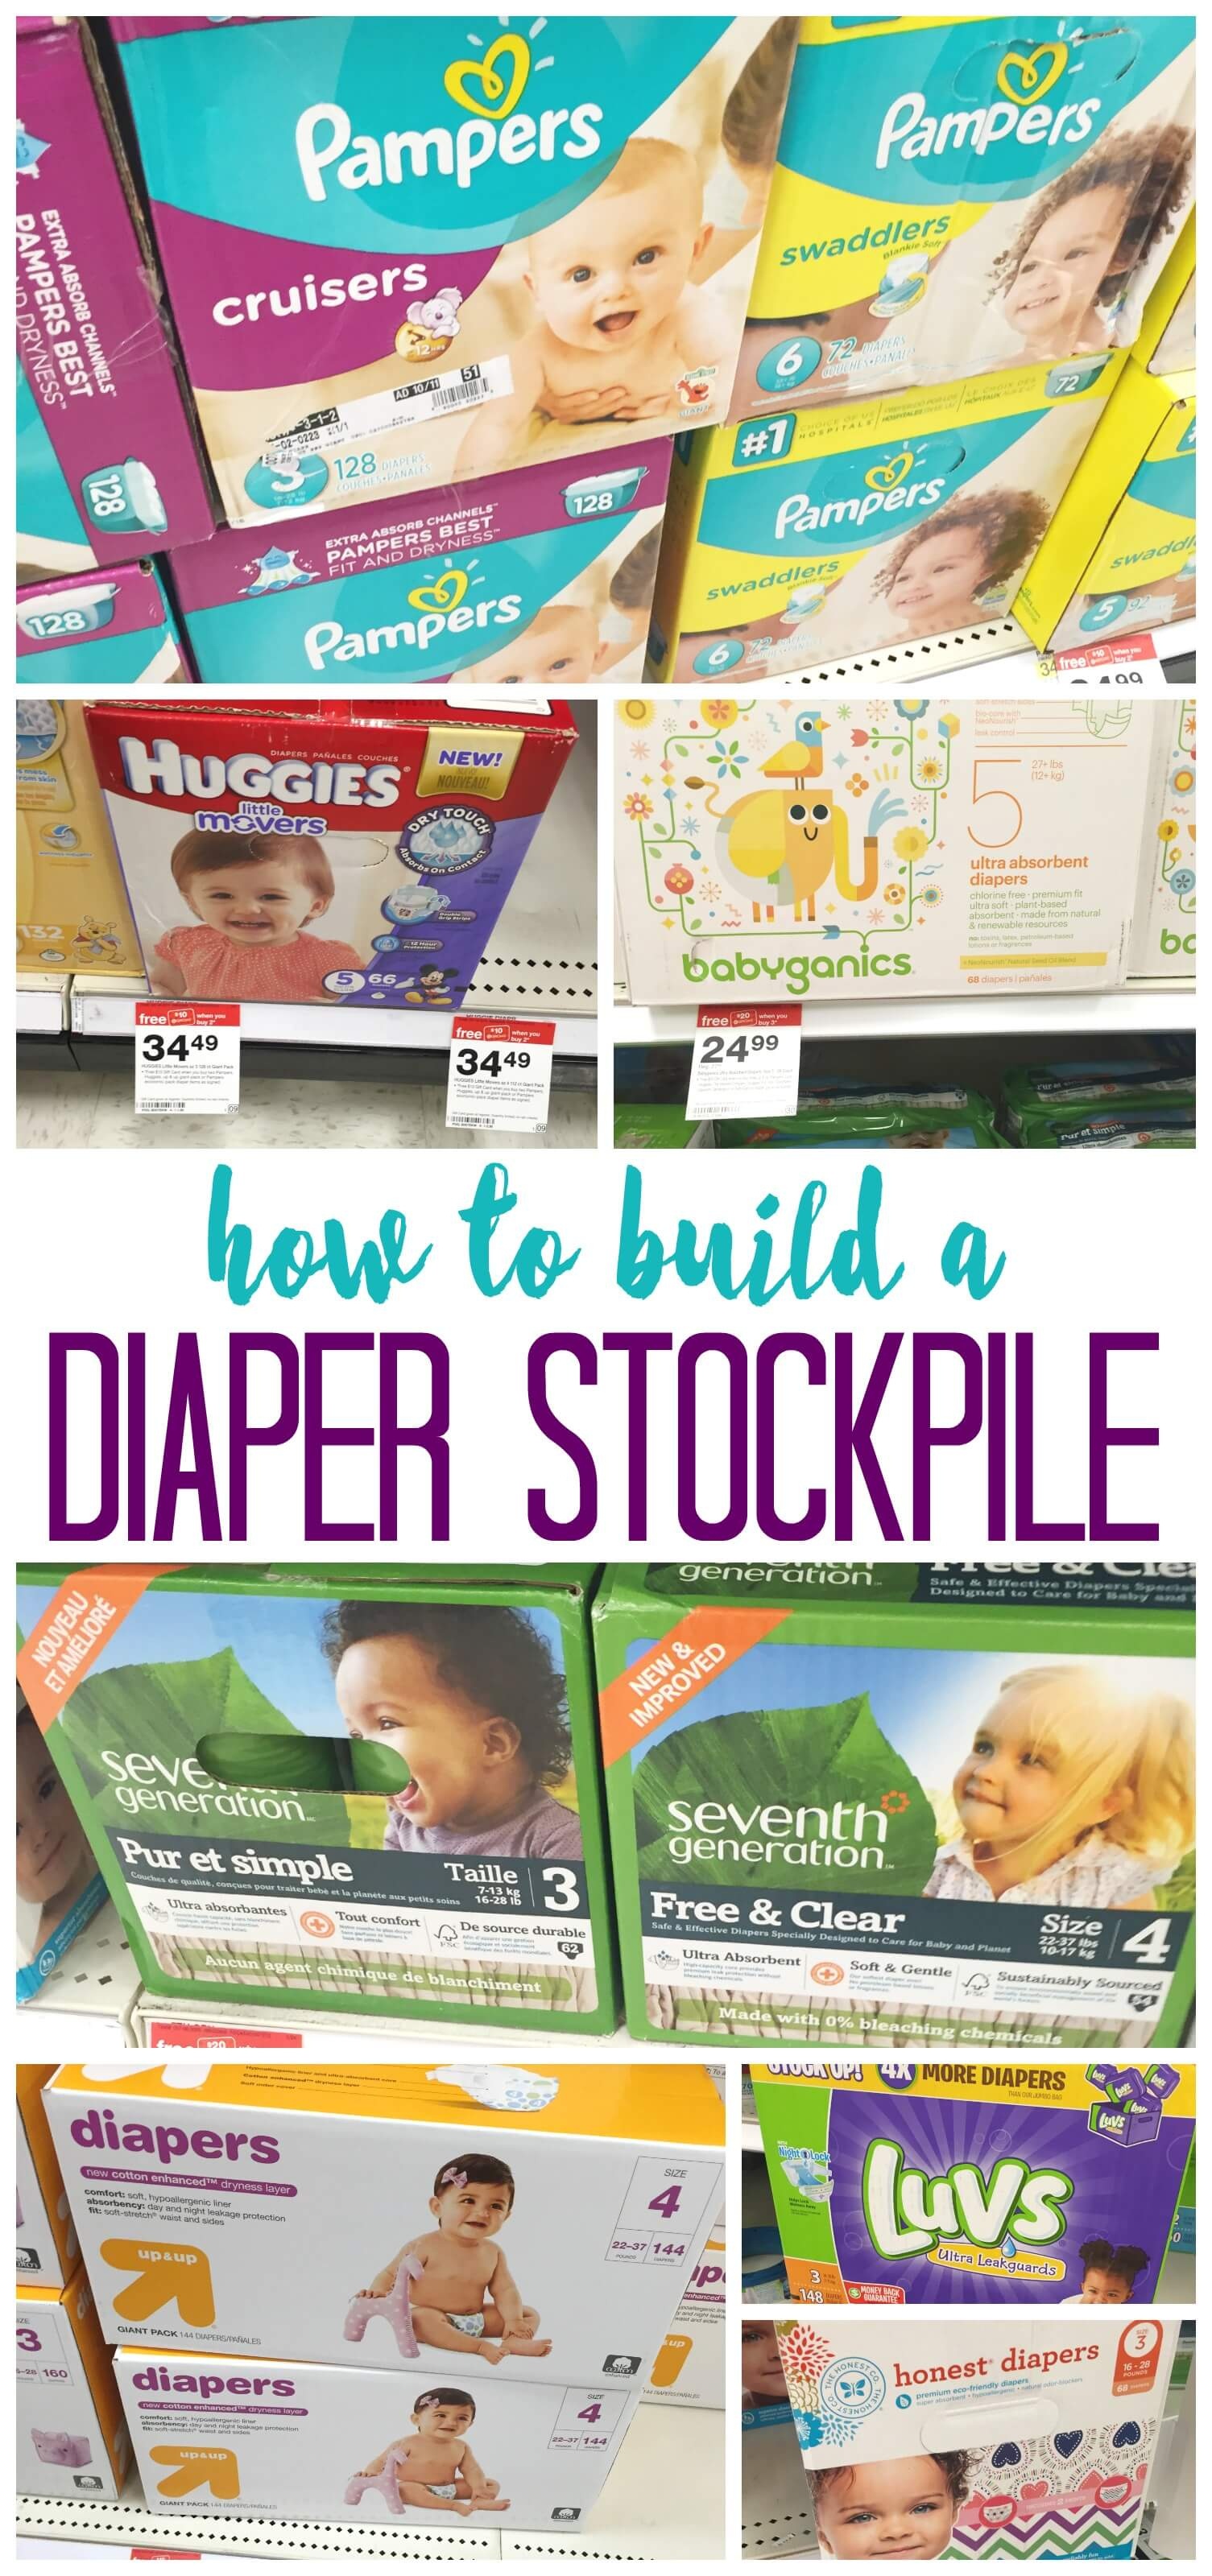 How To Build A Diaper Stockpile - Free Printable Coupons For Baby Diapers